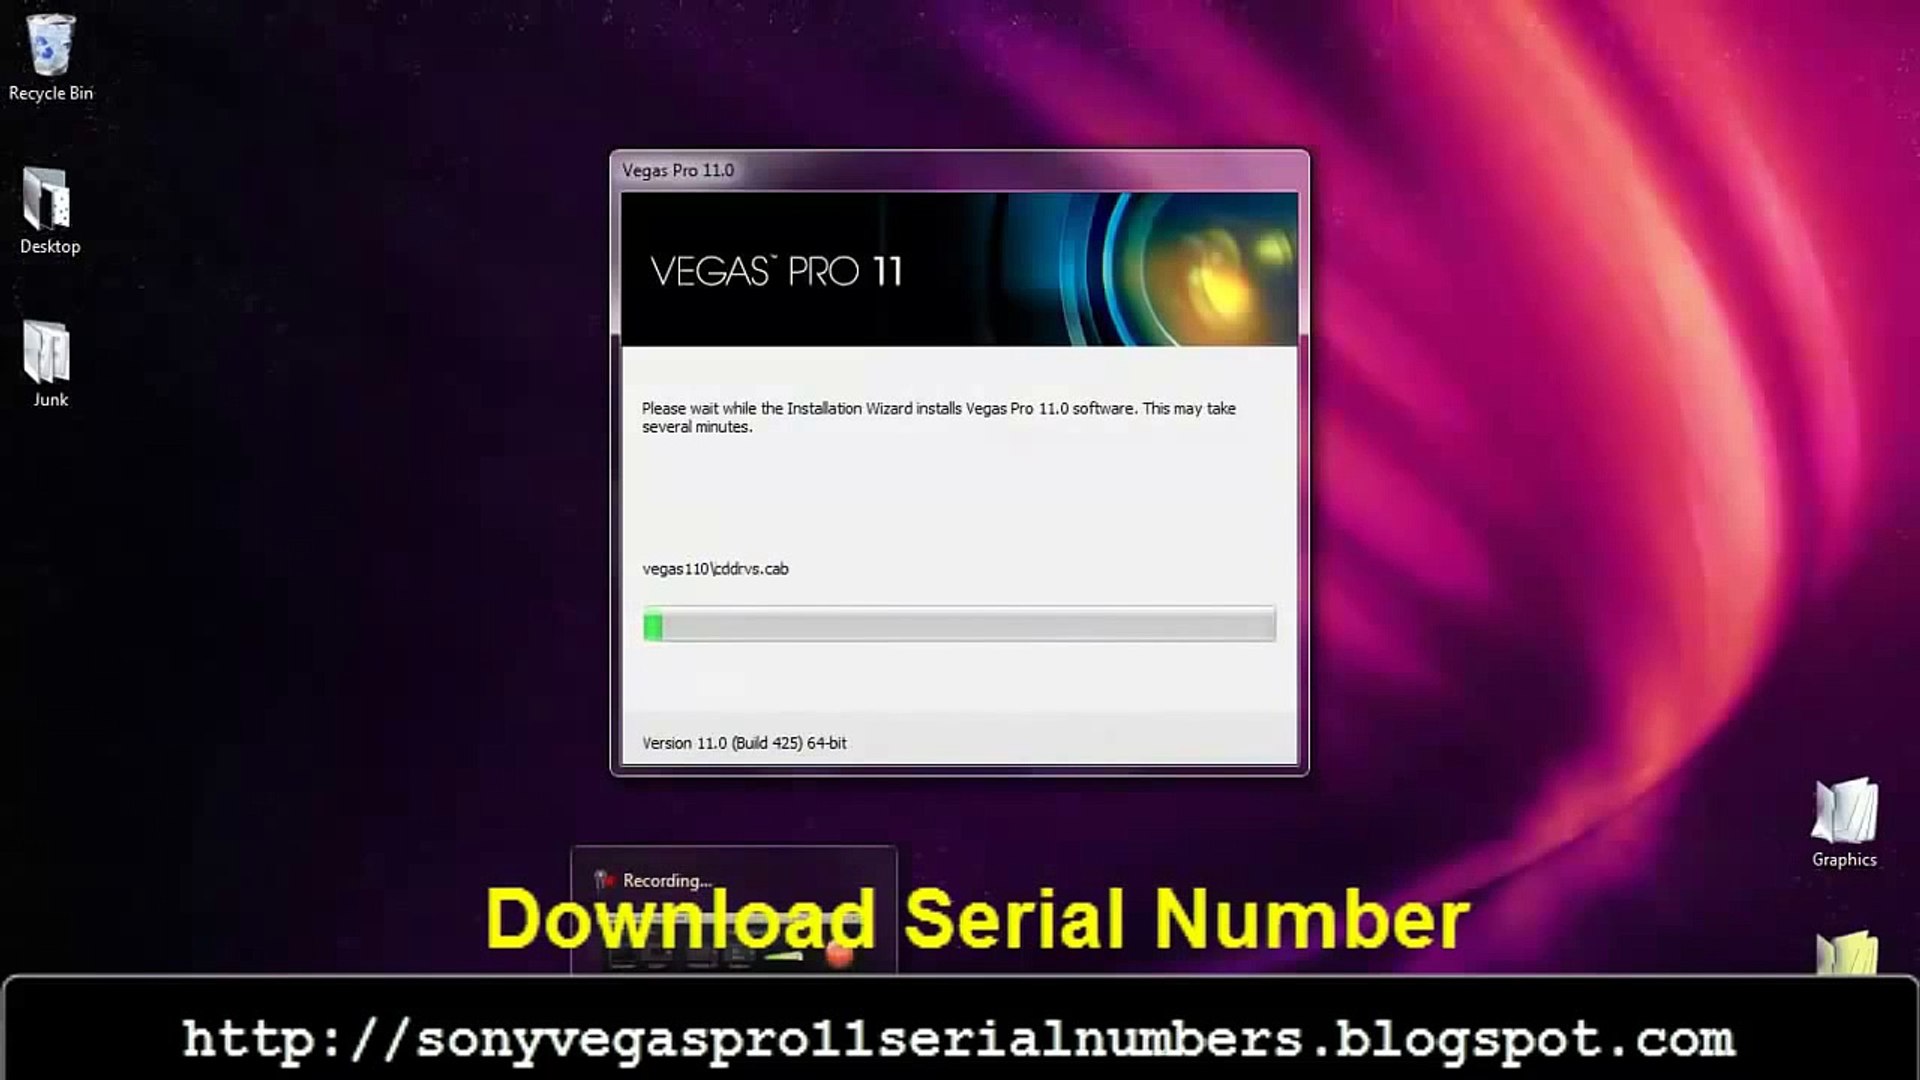 Sony Vegas Pro 11 serial number - Dailymotion Video